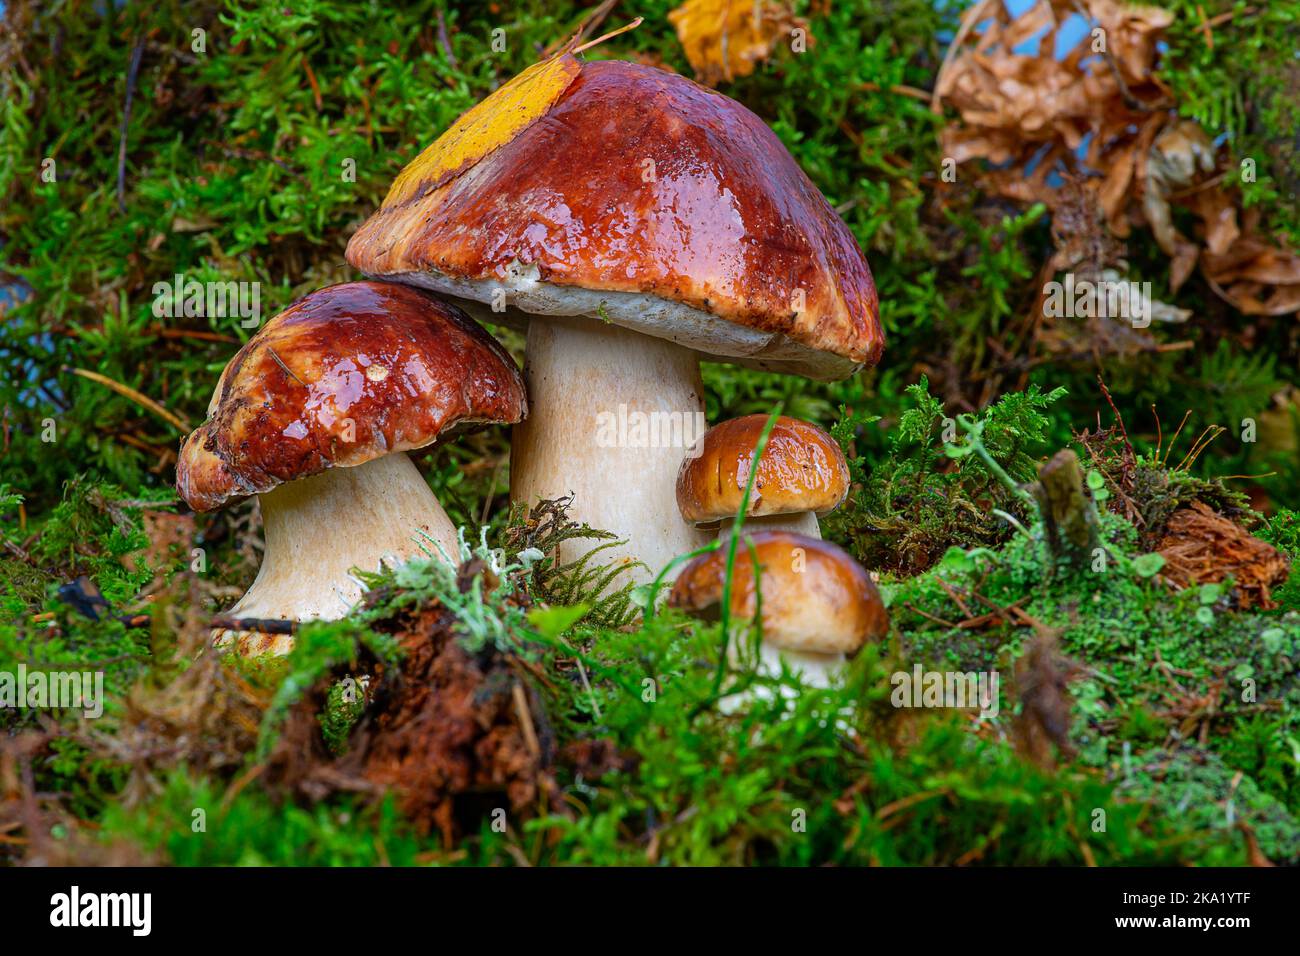 Boletus edulis. Boletus in the forest. A family of porcini mushrooms in green moss close-up Stock Photo